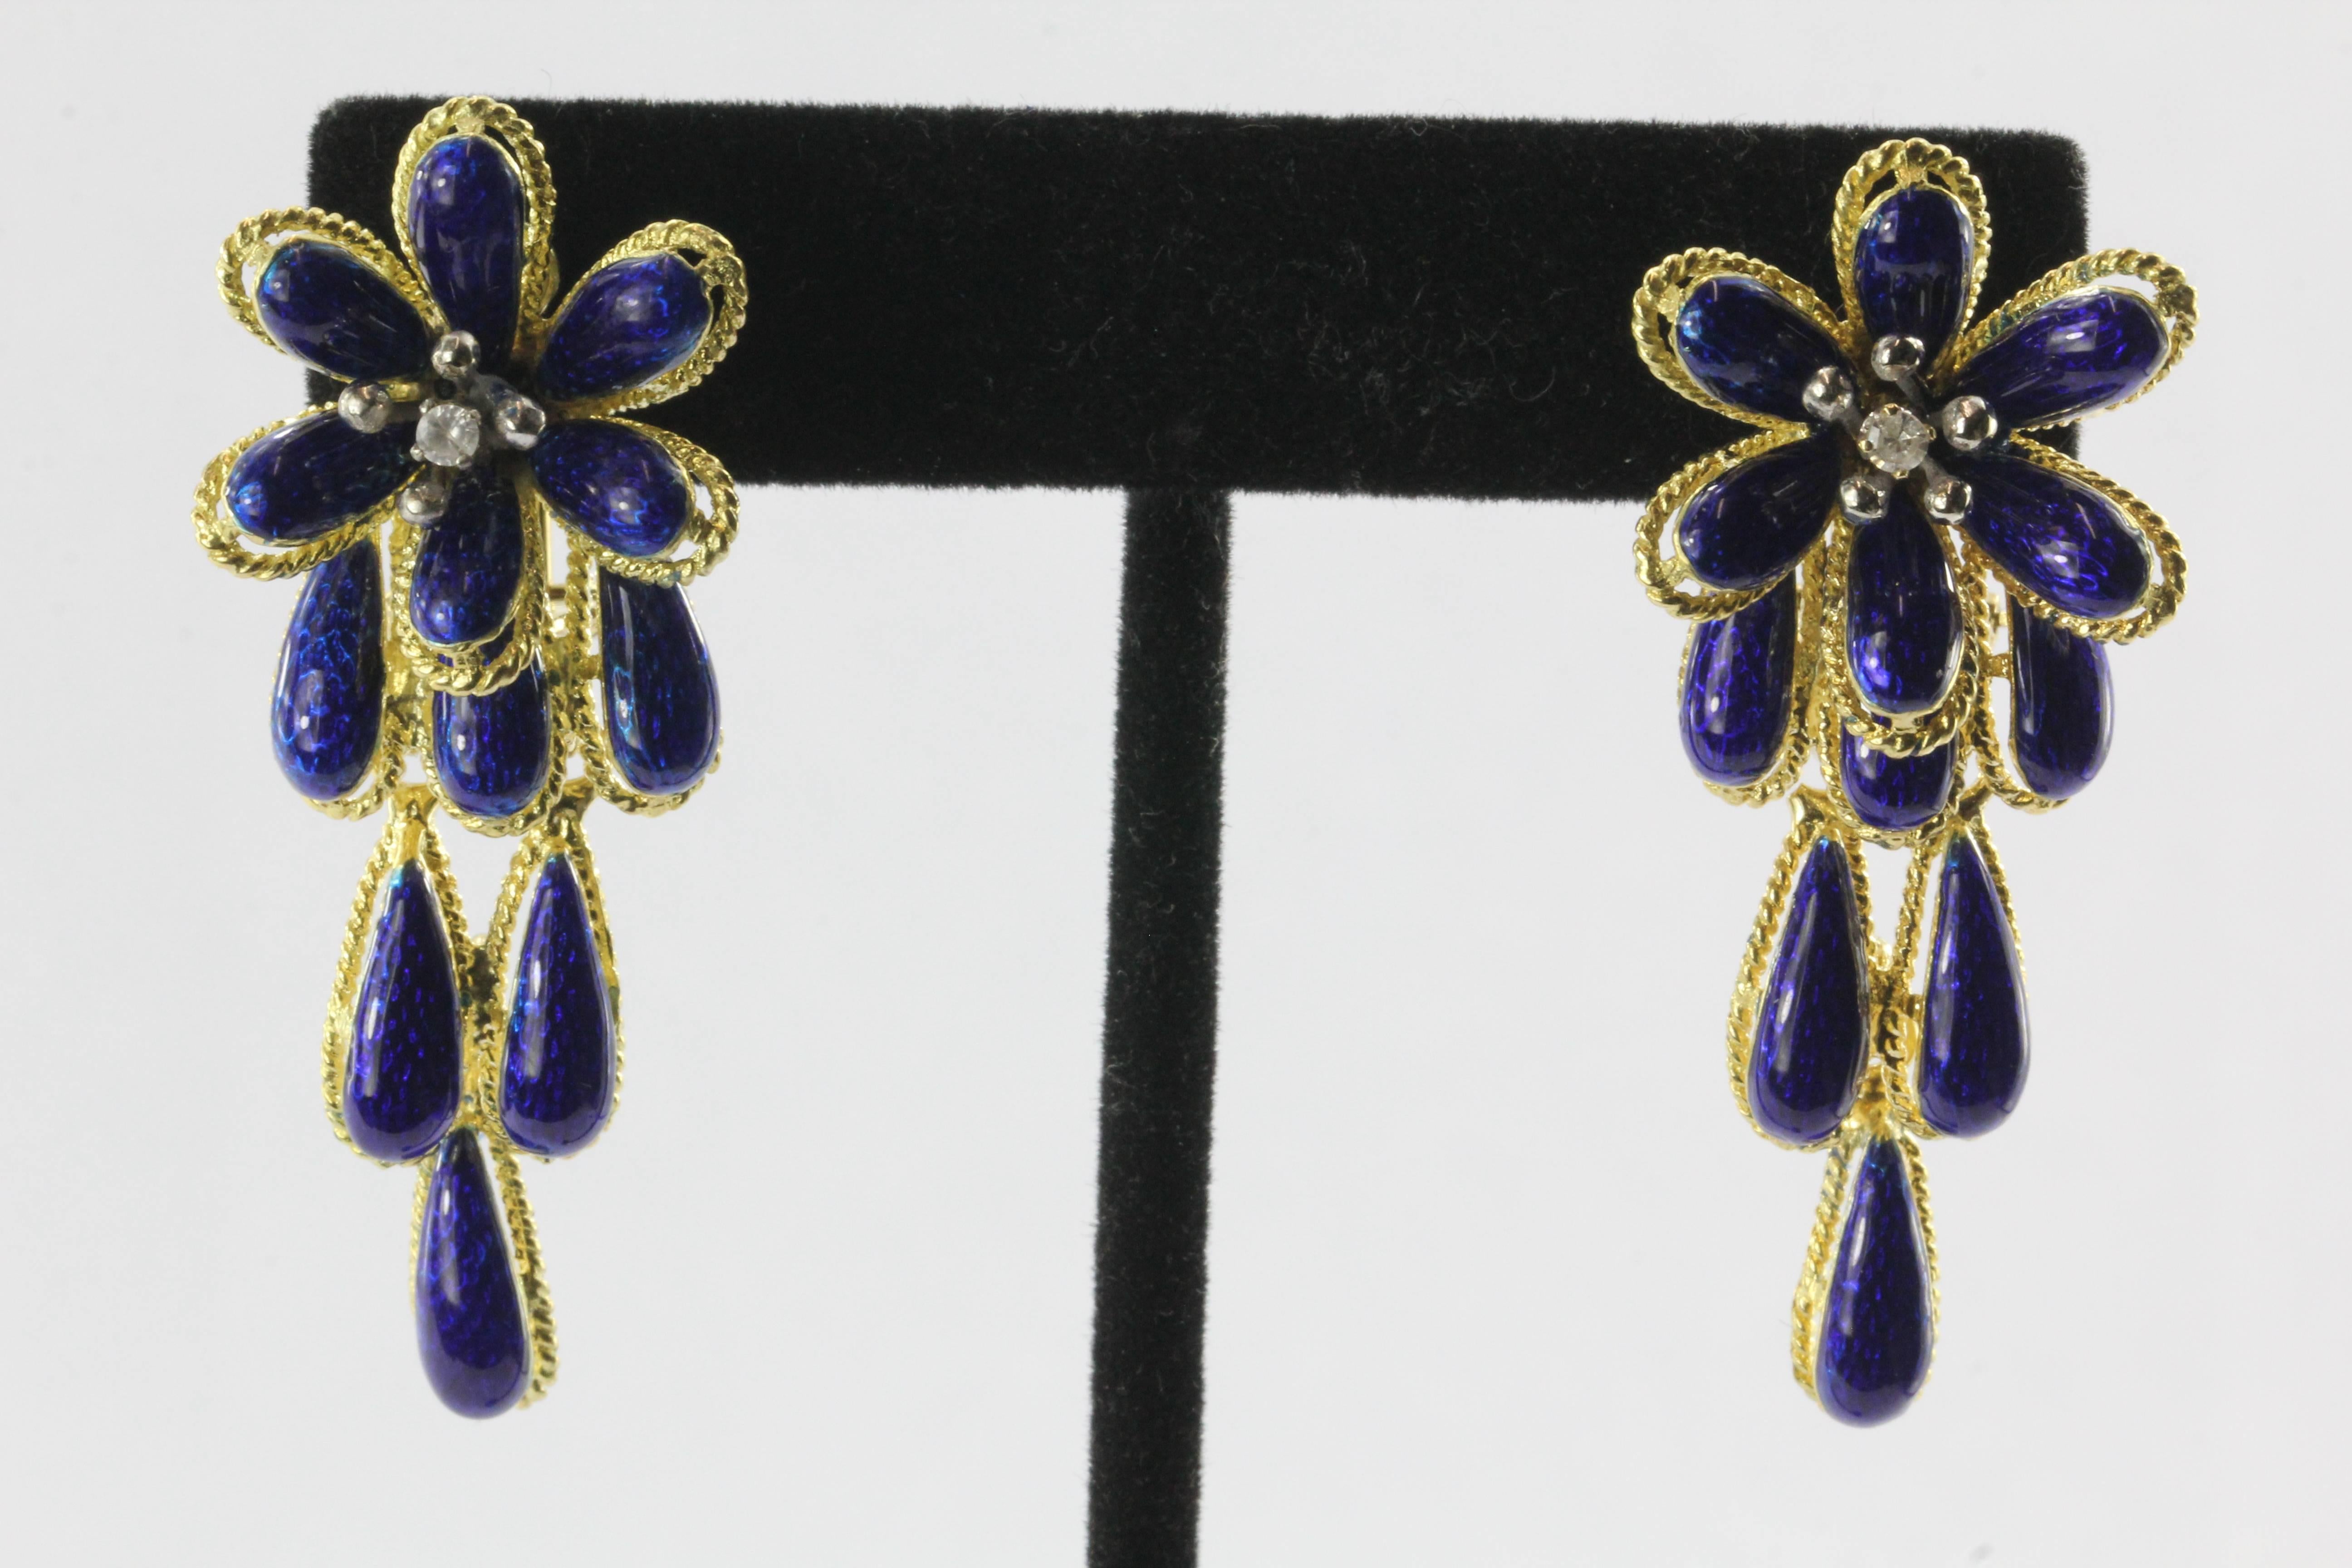 Mid Century Italian 18K Gold Blue Enamel & Diamond Drop Chunky Flower Earrings. The earrings are in excellent estate condition and ready to wear. They are both hallmarked Kt18 ITALY. The royal blue enamel is in flawless condition. Each earring is